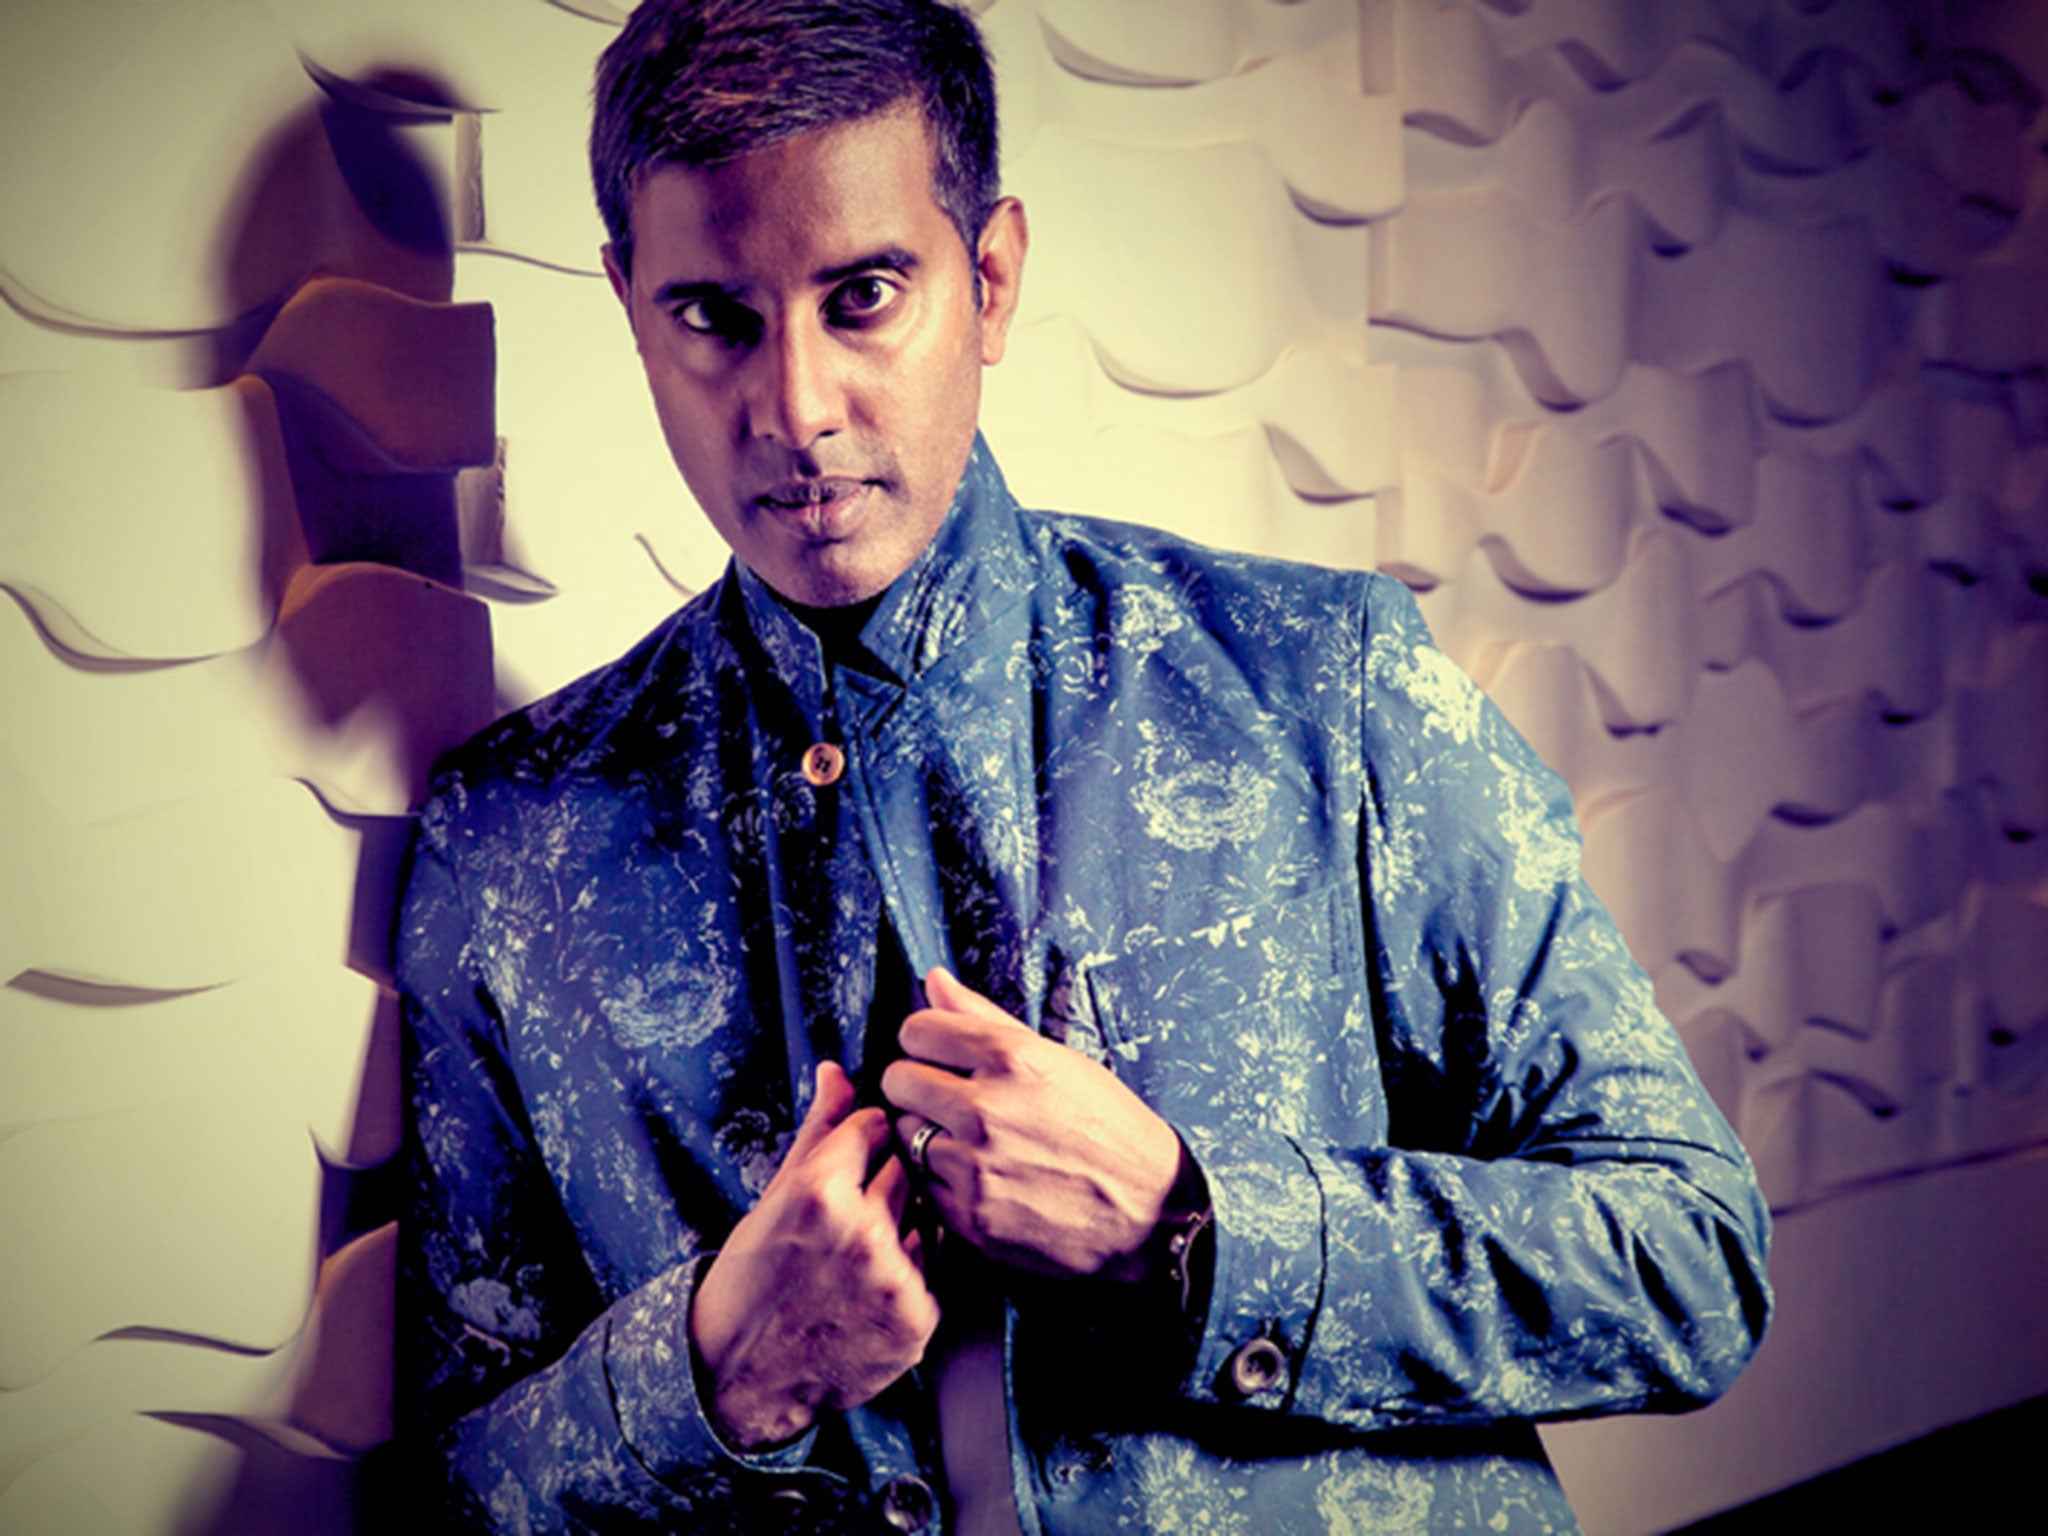 DJ Nihal says ethnic minority presenters should get the chance to air their talents in high-profile programming, not just in ‘the middle of the night’